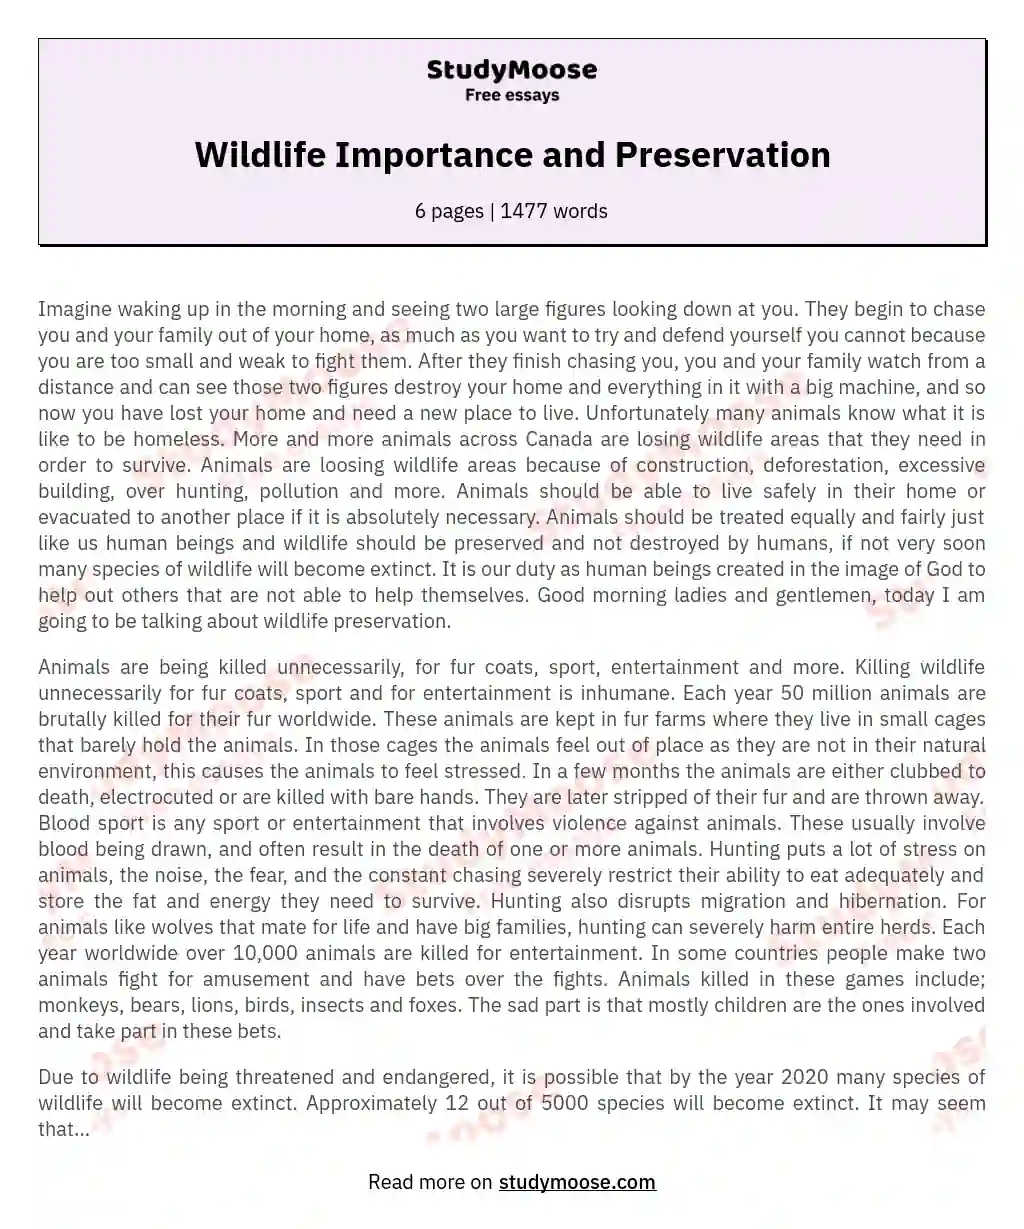 Wildlife Importance and Preservation Free Essay Example